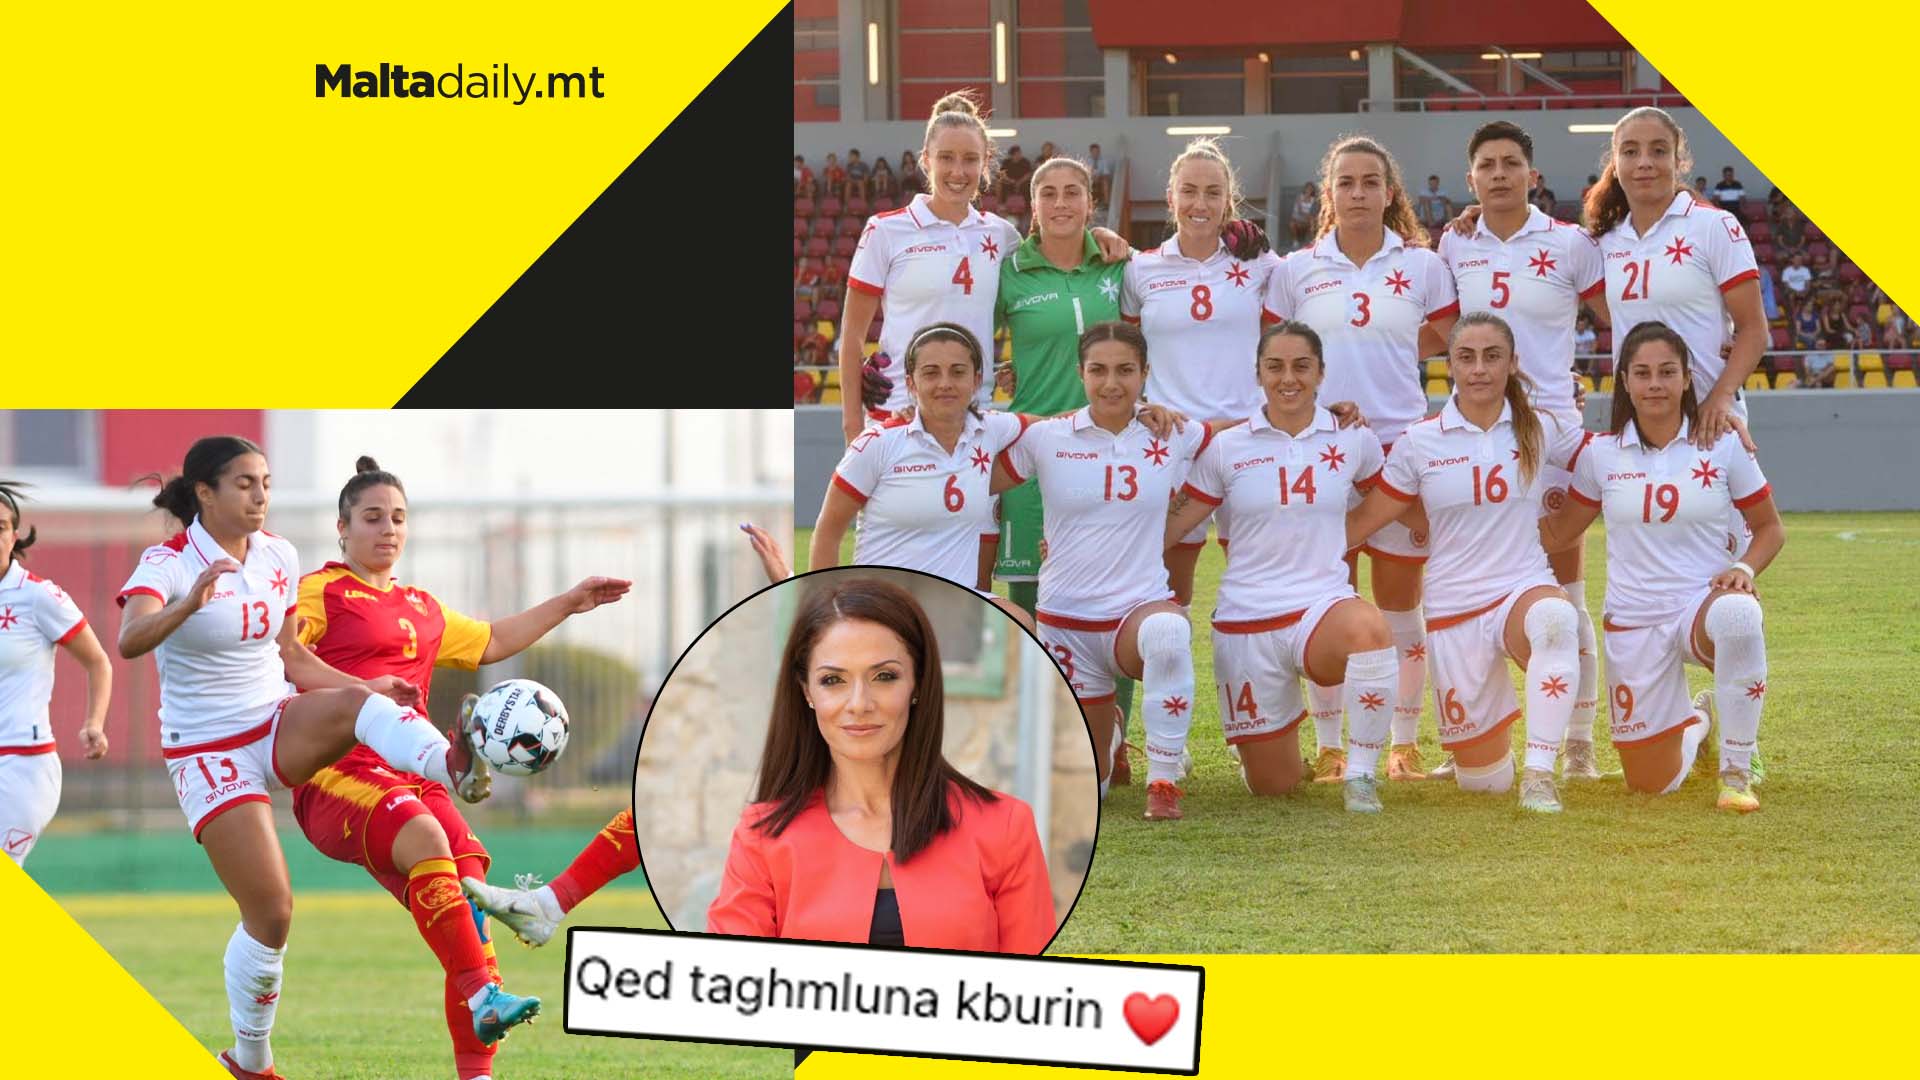 Malta’s women football team finish World Cup qualifiers with 2-0 win over Montenegro